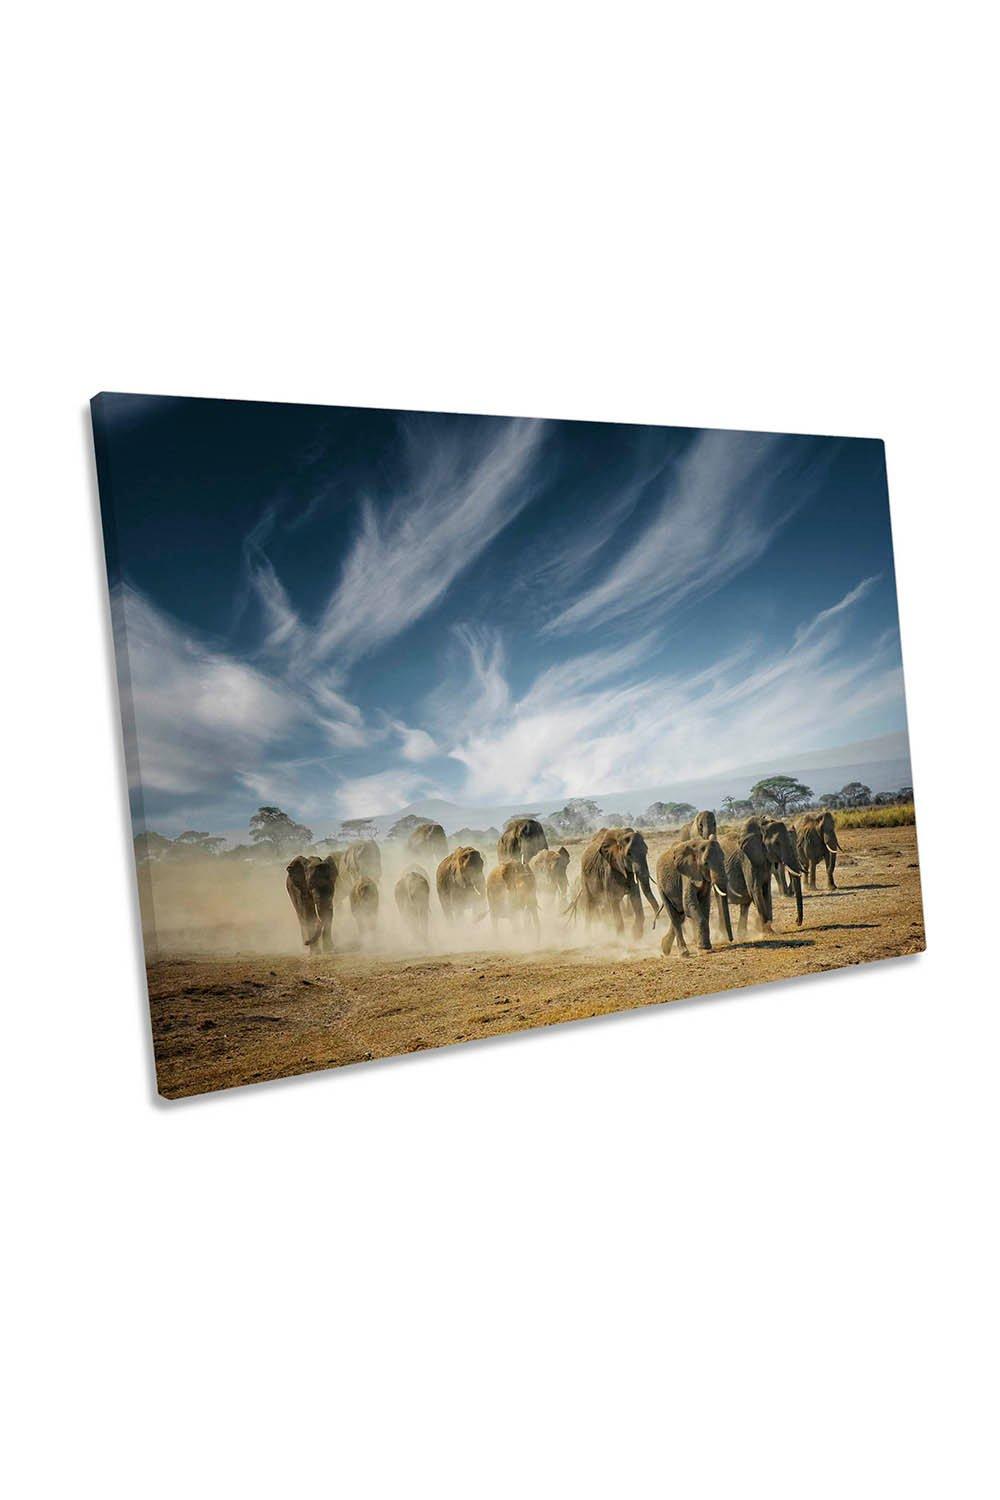 Elephant Family Africa  Canvas Wall Art Picture Print